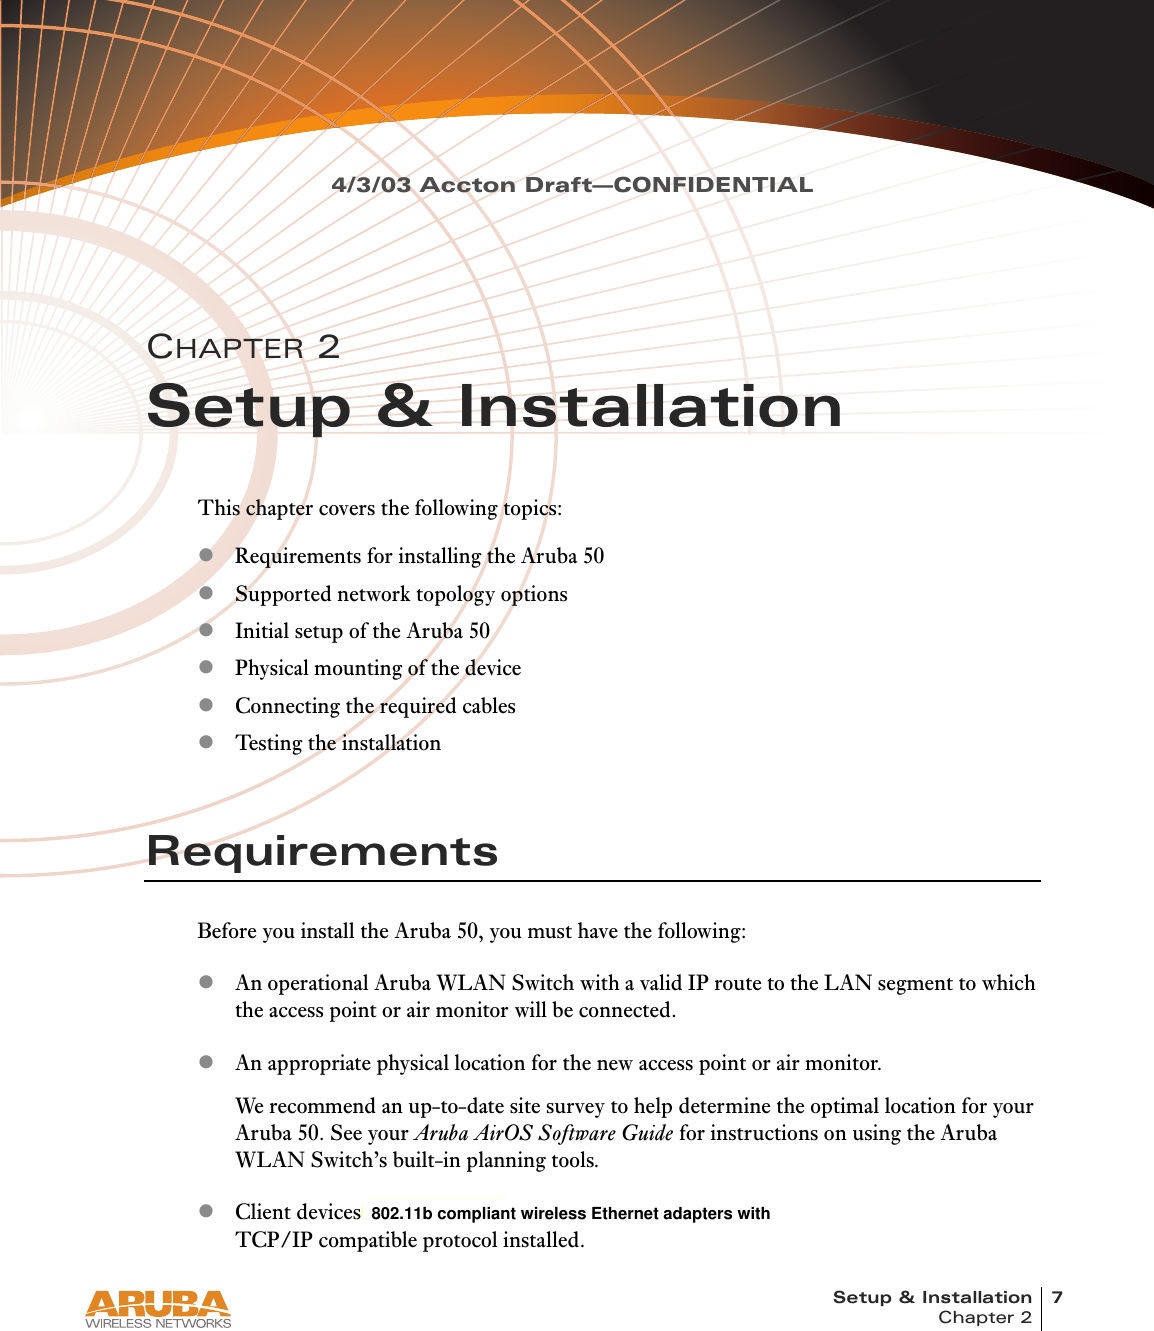 Setup &amp; Installation 7Chapter 24/3/03 Accton Draft—CONFIDENTIALCHAPTER 2Setup &amp; InstallationThis chapter covers the following topics:zRequirements for installing the Aruba 50zSupported network topology optionszInitial setup of the Aruba 50zPhysical mounting of the devicezConnecting the required cableszTesting the installationRequirementsBefore you install the Aruba 50, you must have the following:zAn operational Aruba WLAN Switch with a valid IP route to the LAN segment to which the access point or air monitor will be connected.zAn appropriate physical location for the new access point or air monitor.We recommend an up-to-date site survey to help determine the optimal location for your Aruba 50. See your Aruba AirOS Software Guide for instructions on using the Aruba WLAN Switch’s built-in planning tools.zClient devices with 802.11a or 802.11b compliant wireless Ethernet adapters with TCP/IP compatible protocol installed.  802.11b compliant wireless Ethernet adapters with